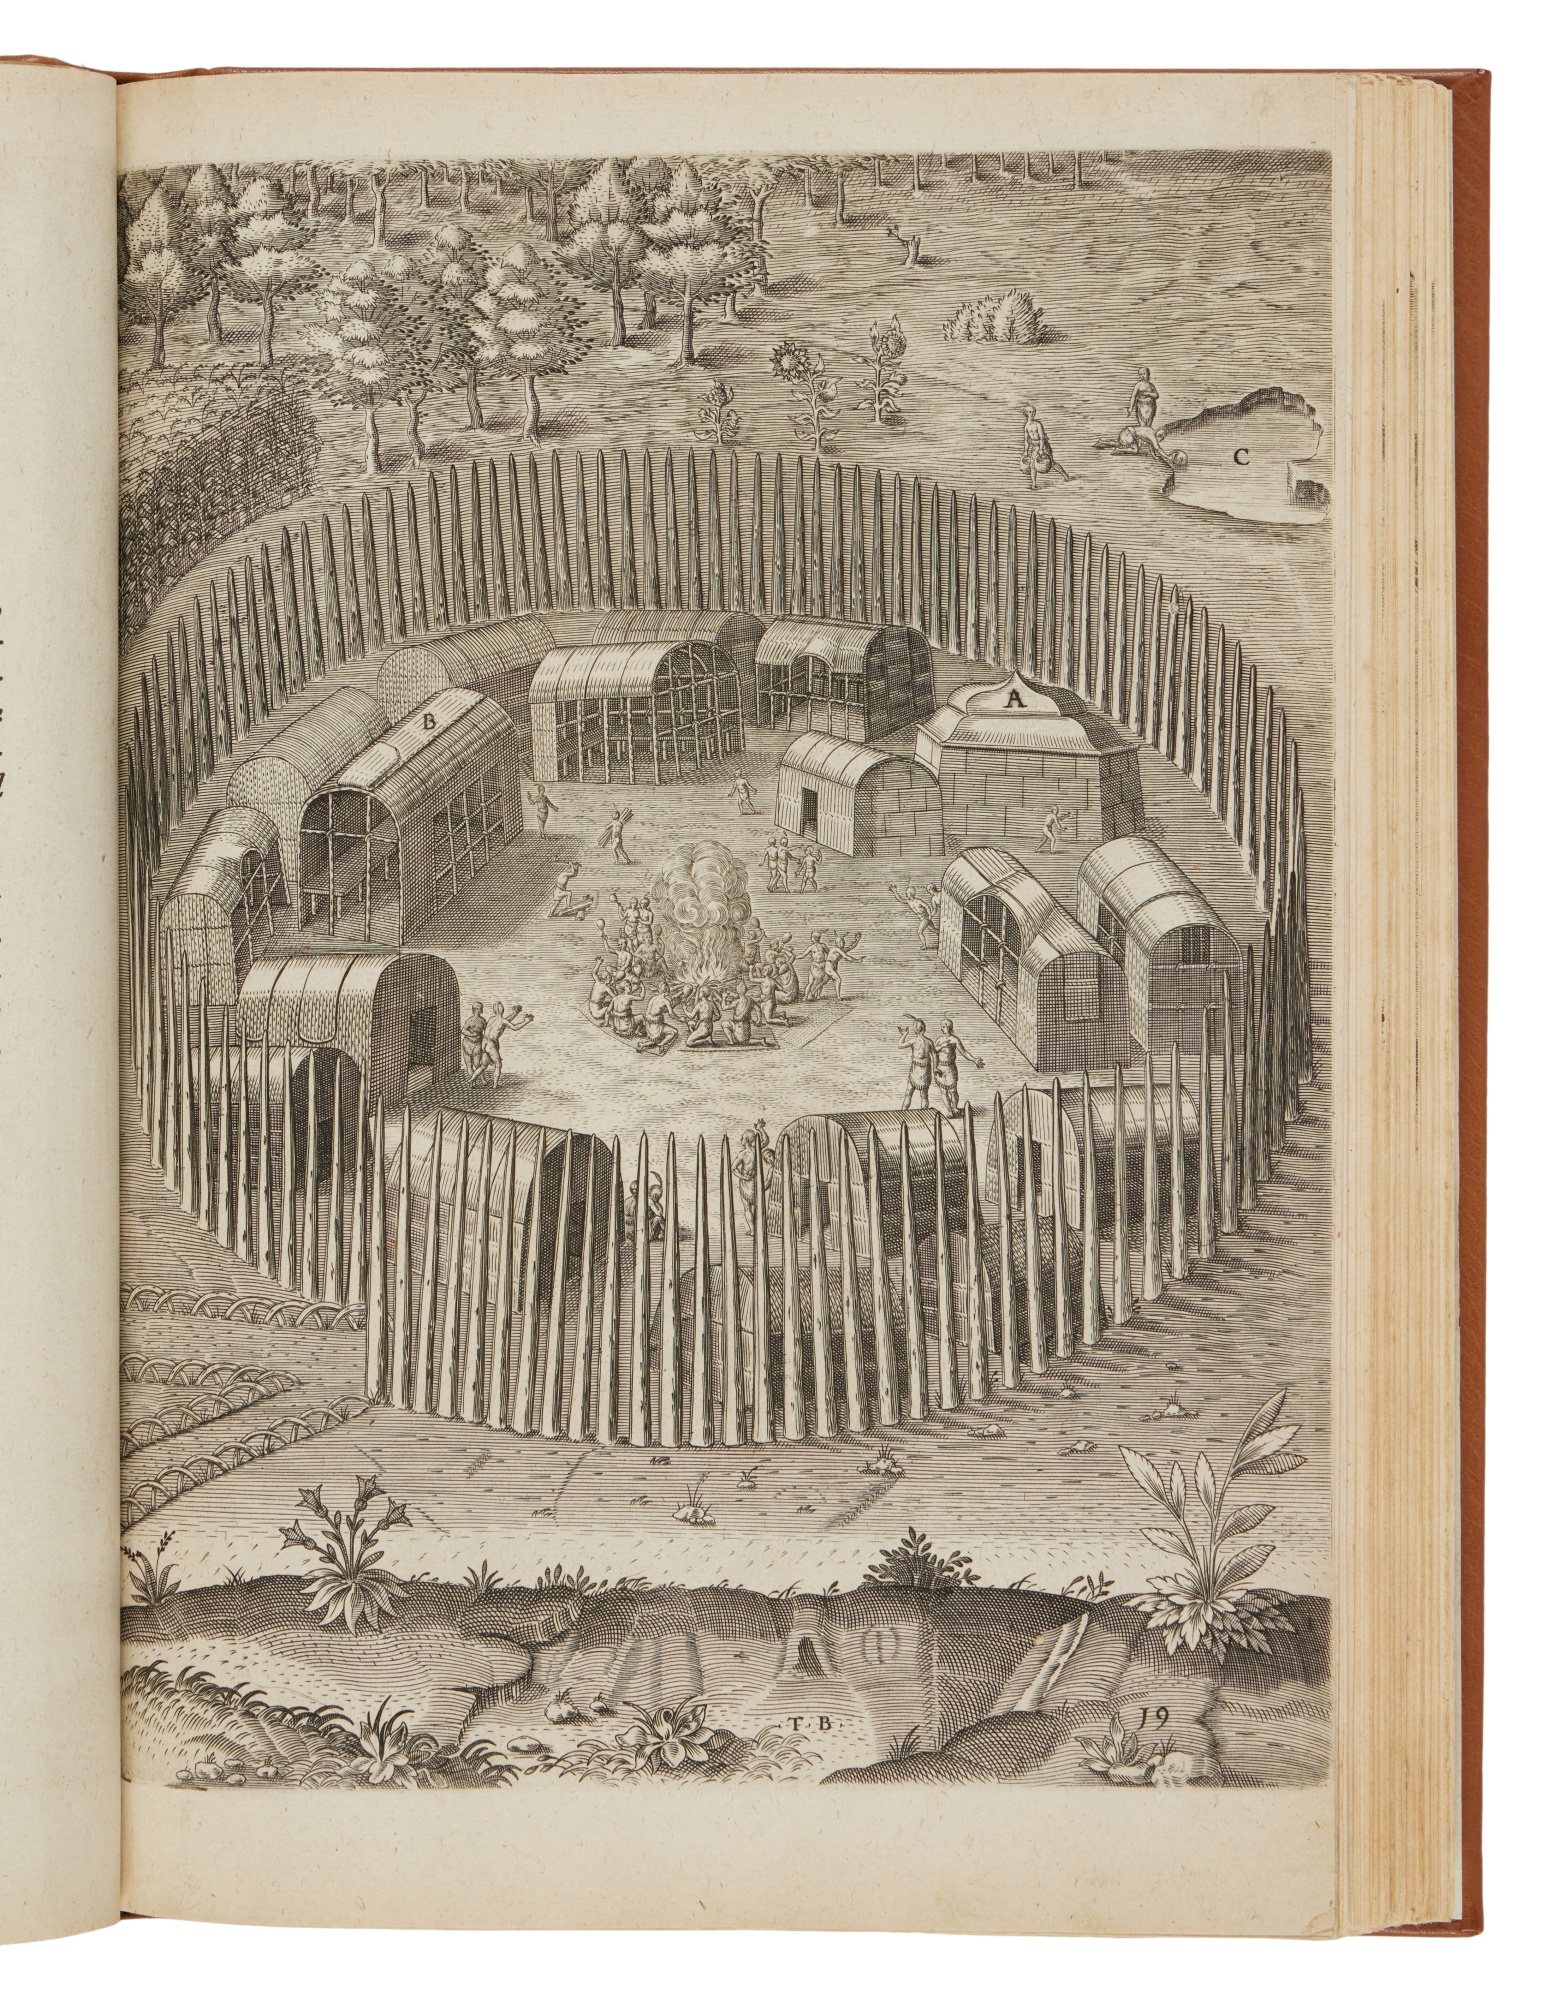 Bry, Theodor de | The most famed of all the collections of voyages - Image 13 of 16